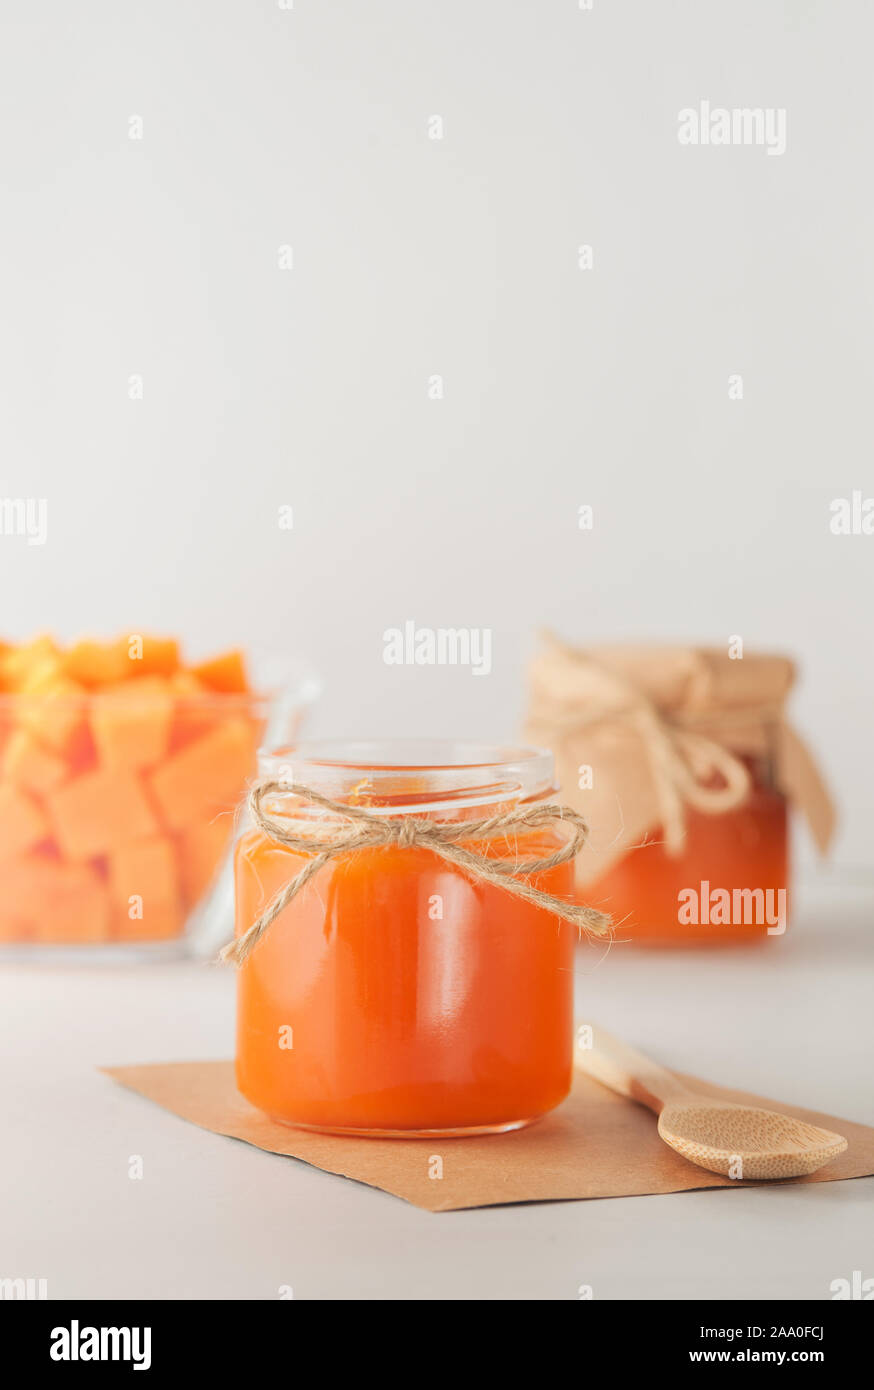 Homemade pumpkin jam in the glass jars. Selective focus.Autumn preserve.Image in vertical orientation with copy space. Stock Photo